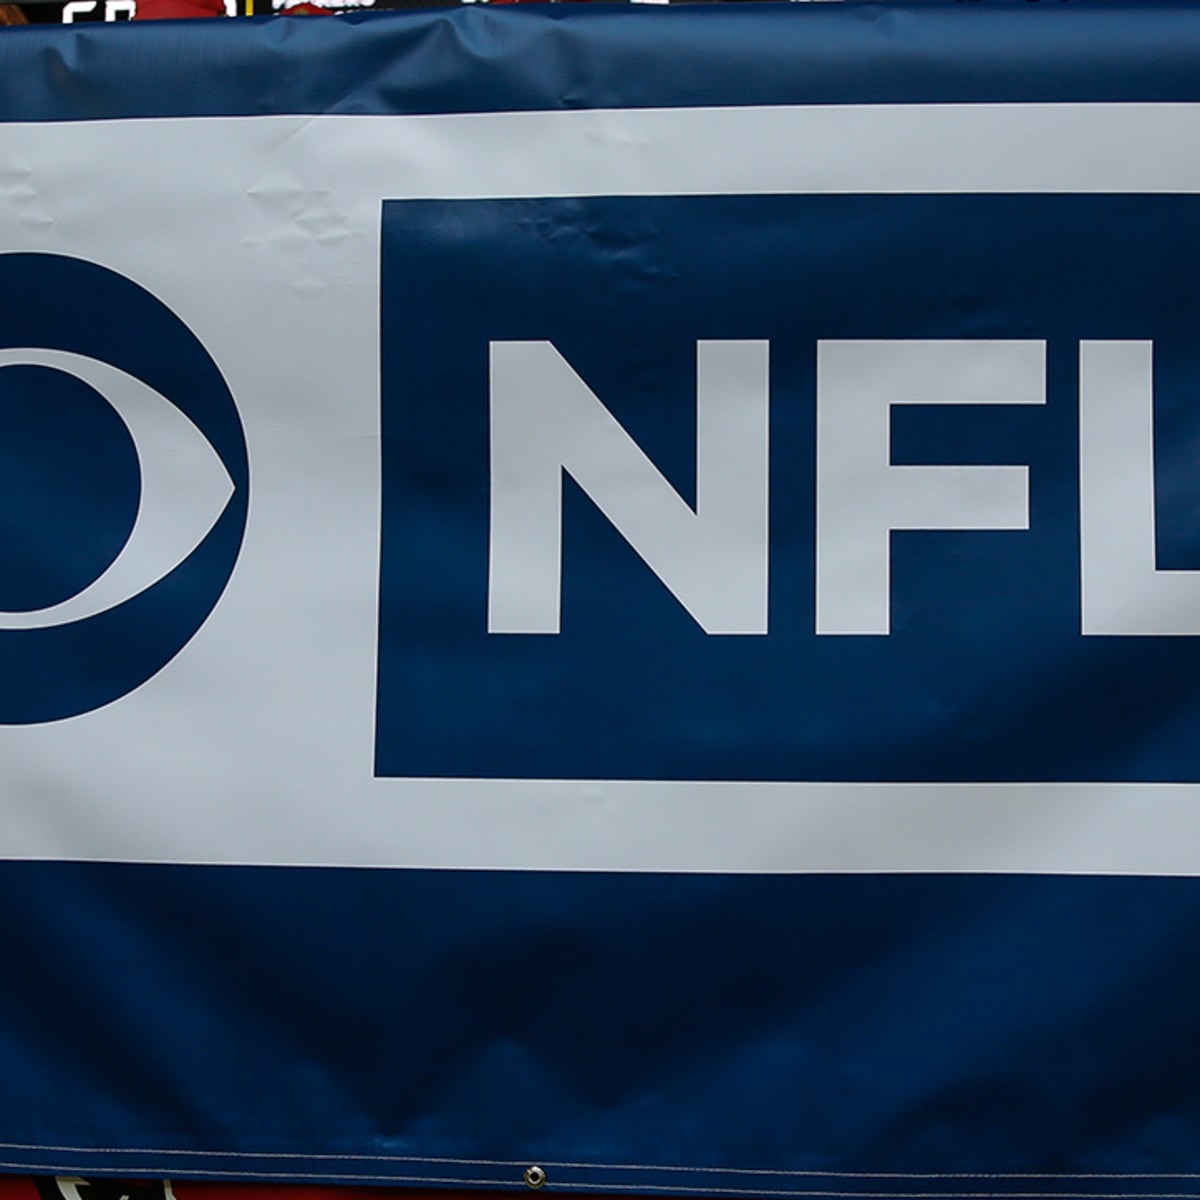 CBS broadcasters will not mention betting during Super Bowl coverage